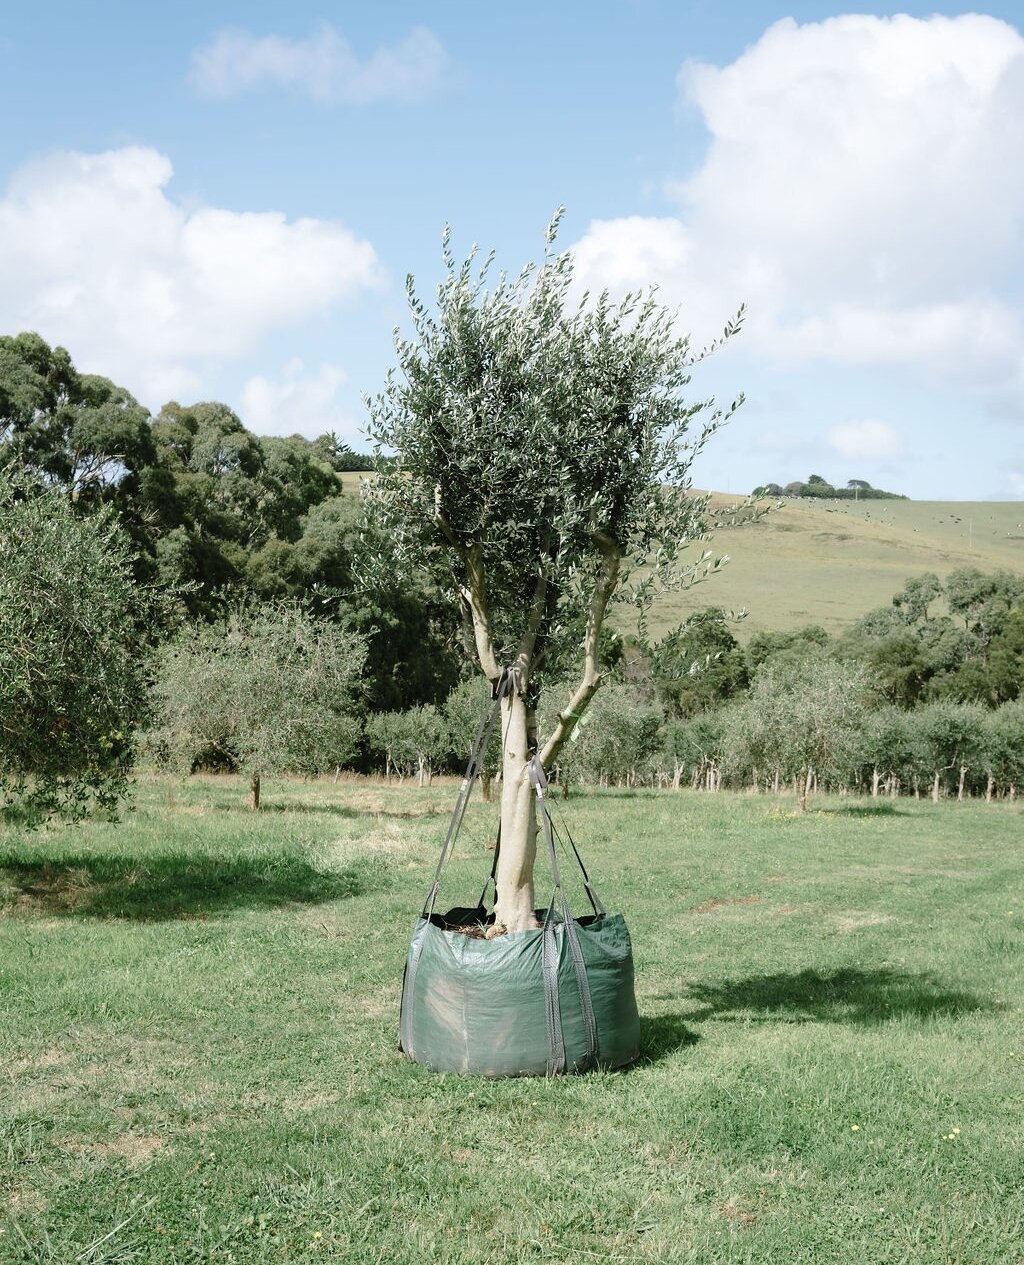 Throw this chap on the back of the ute and be on your way! 🌳⁠
⁠
#gardengrowntrees #morningtonpeninsula #olivetrees #matureolives #olivegrove #exorchardolives  #landscaping #landscapingdesign #landscapedesign #gardendesign #planting #gnarlytree #tree